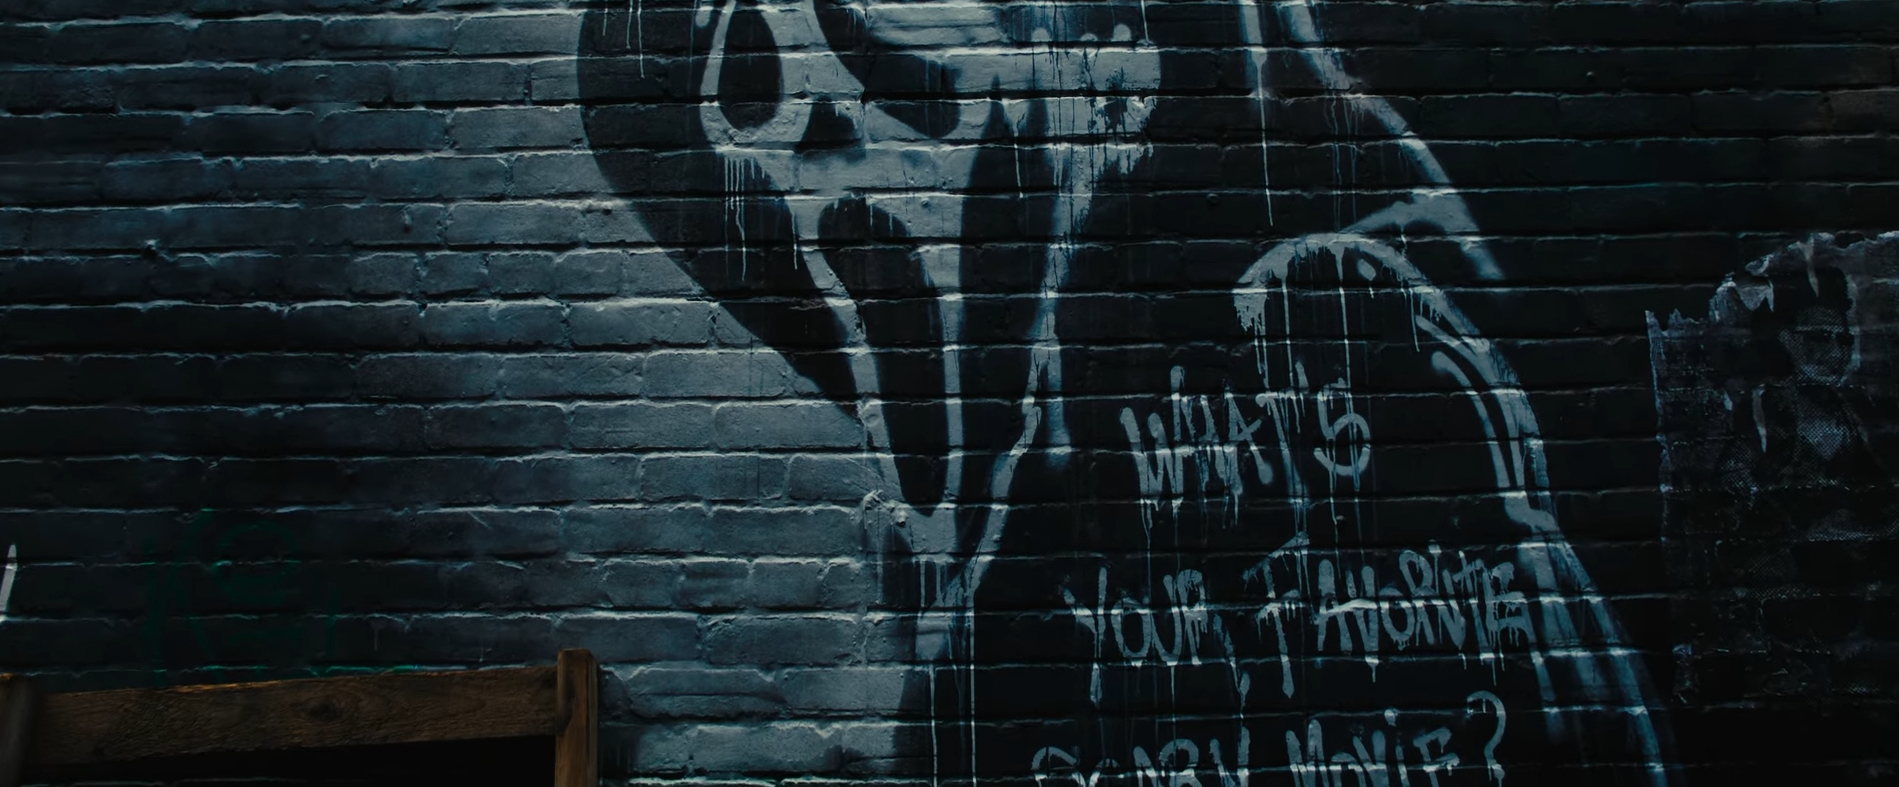 Ghostface "WHAT'S YOUR FAVORITE SCARY MOVIE" graffiti from Scream VI trailer. Courtesy of Paramount Pictures/ Spyglass Media Group/YouTube